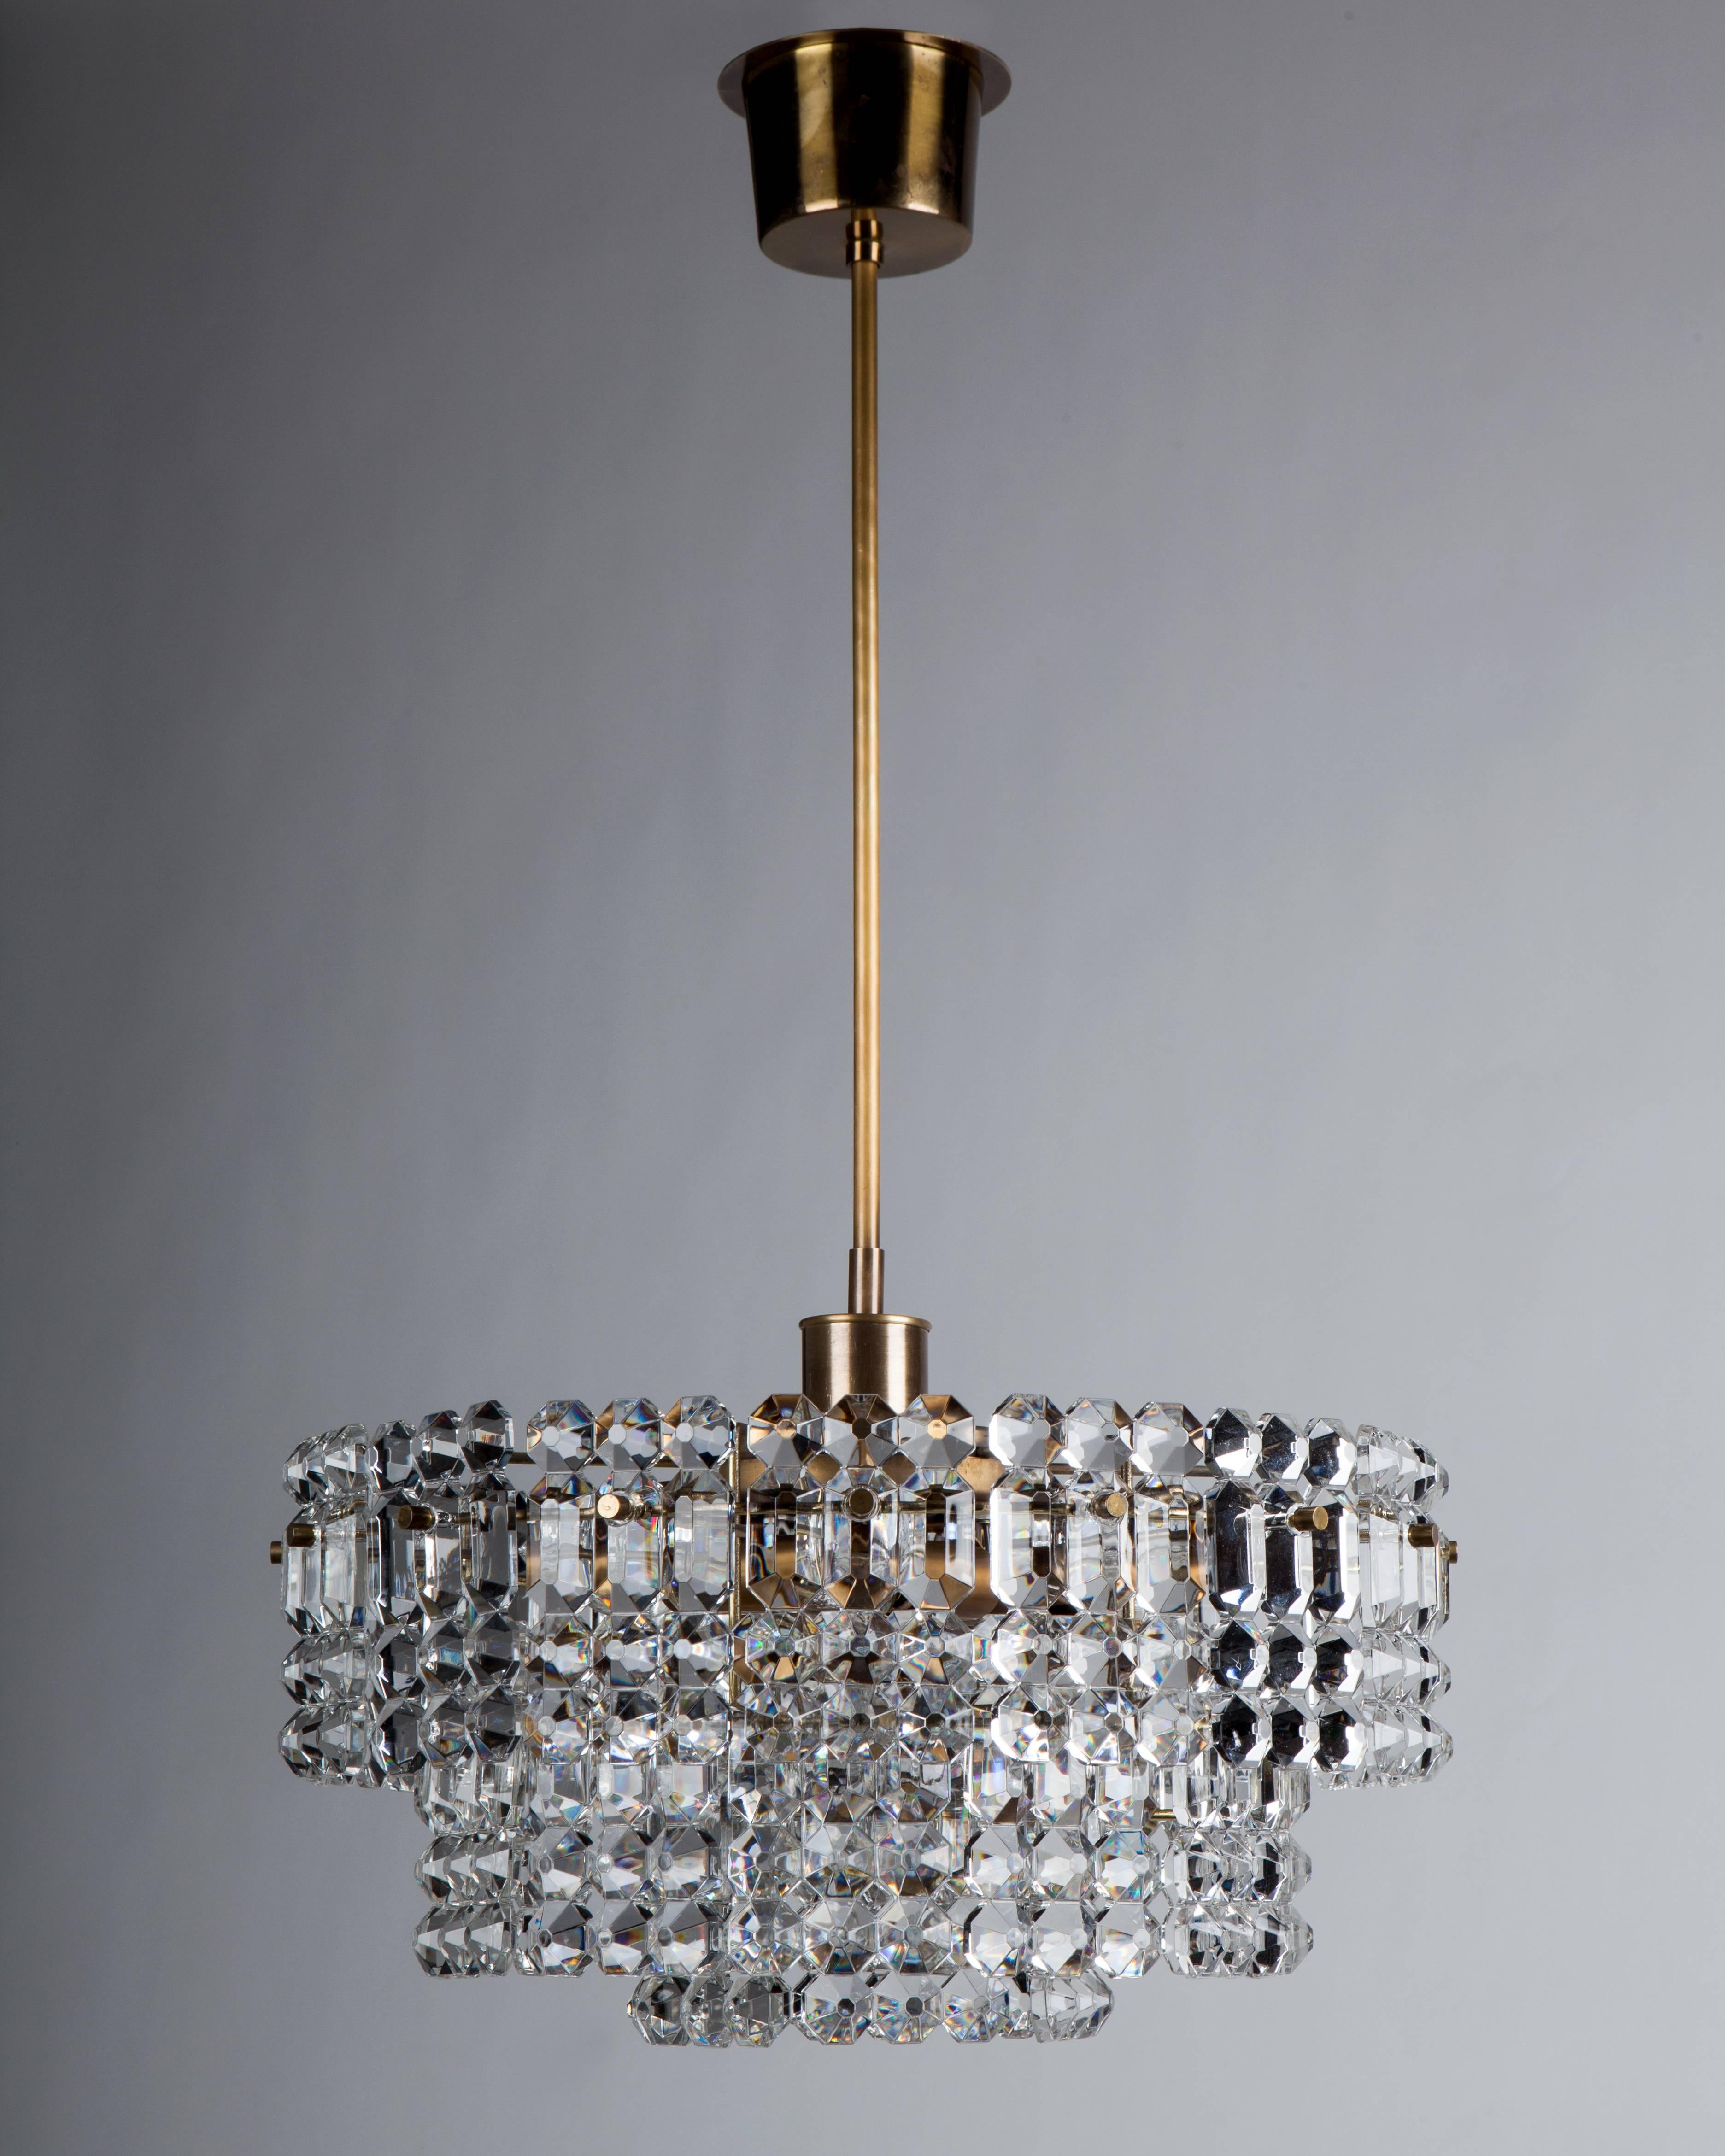 AHL3973.
A three-tier chandelier with tiles of thick clear glass held on a dore brass frame in graduated hoops. This mid century modern fixture is attributed to the Austrian maker Kinkeldey. Due to the antique nature of this fixture, there may be